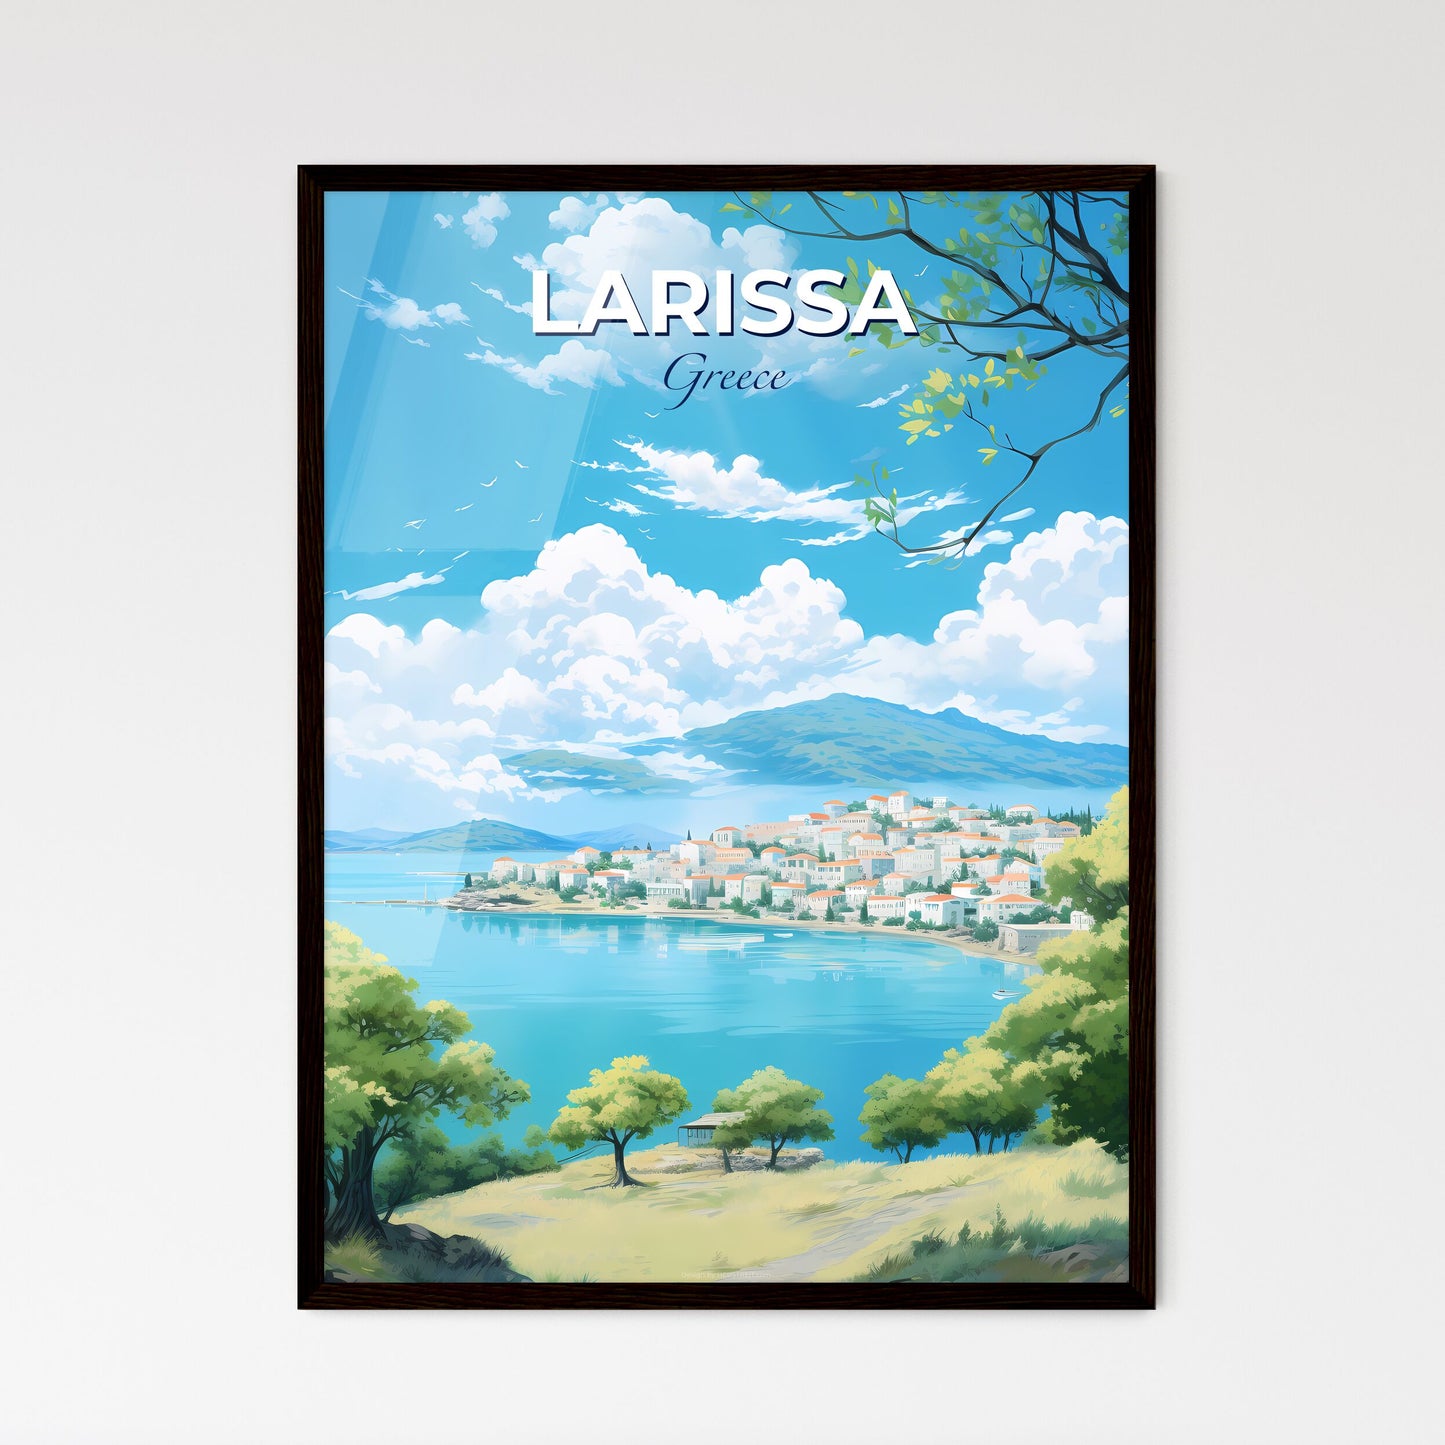 Larissa Greece Skyline - A Landscape Of A Town By A Body Of Water - Customizable Travel Gift Default Title